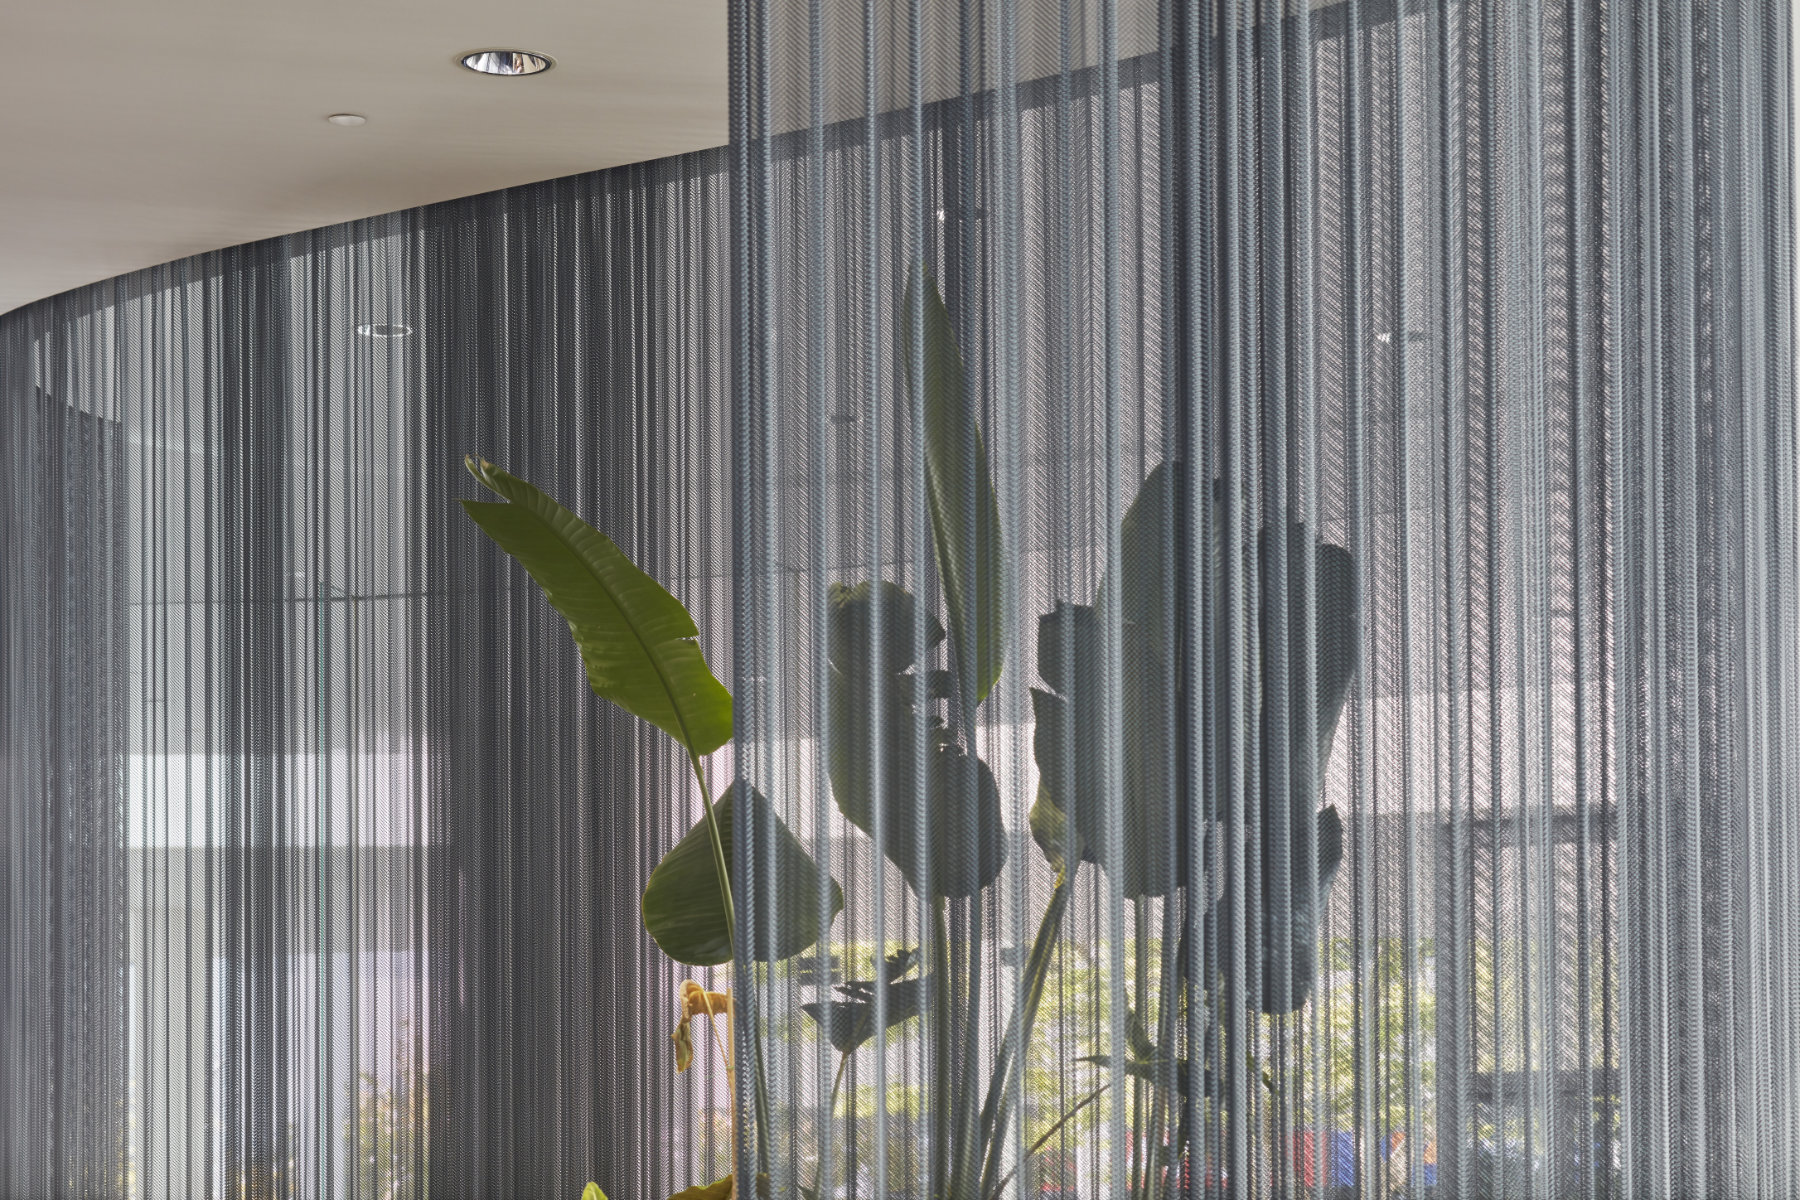 Fabricoil Interior Drapery, Metal Mesh Partition, Steel Coiled Wire Fabric in Gunmetal Black with Steel Secura Track Attachment System at QV1 Lobby, Australia - Plus Architecture